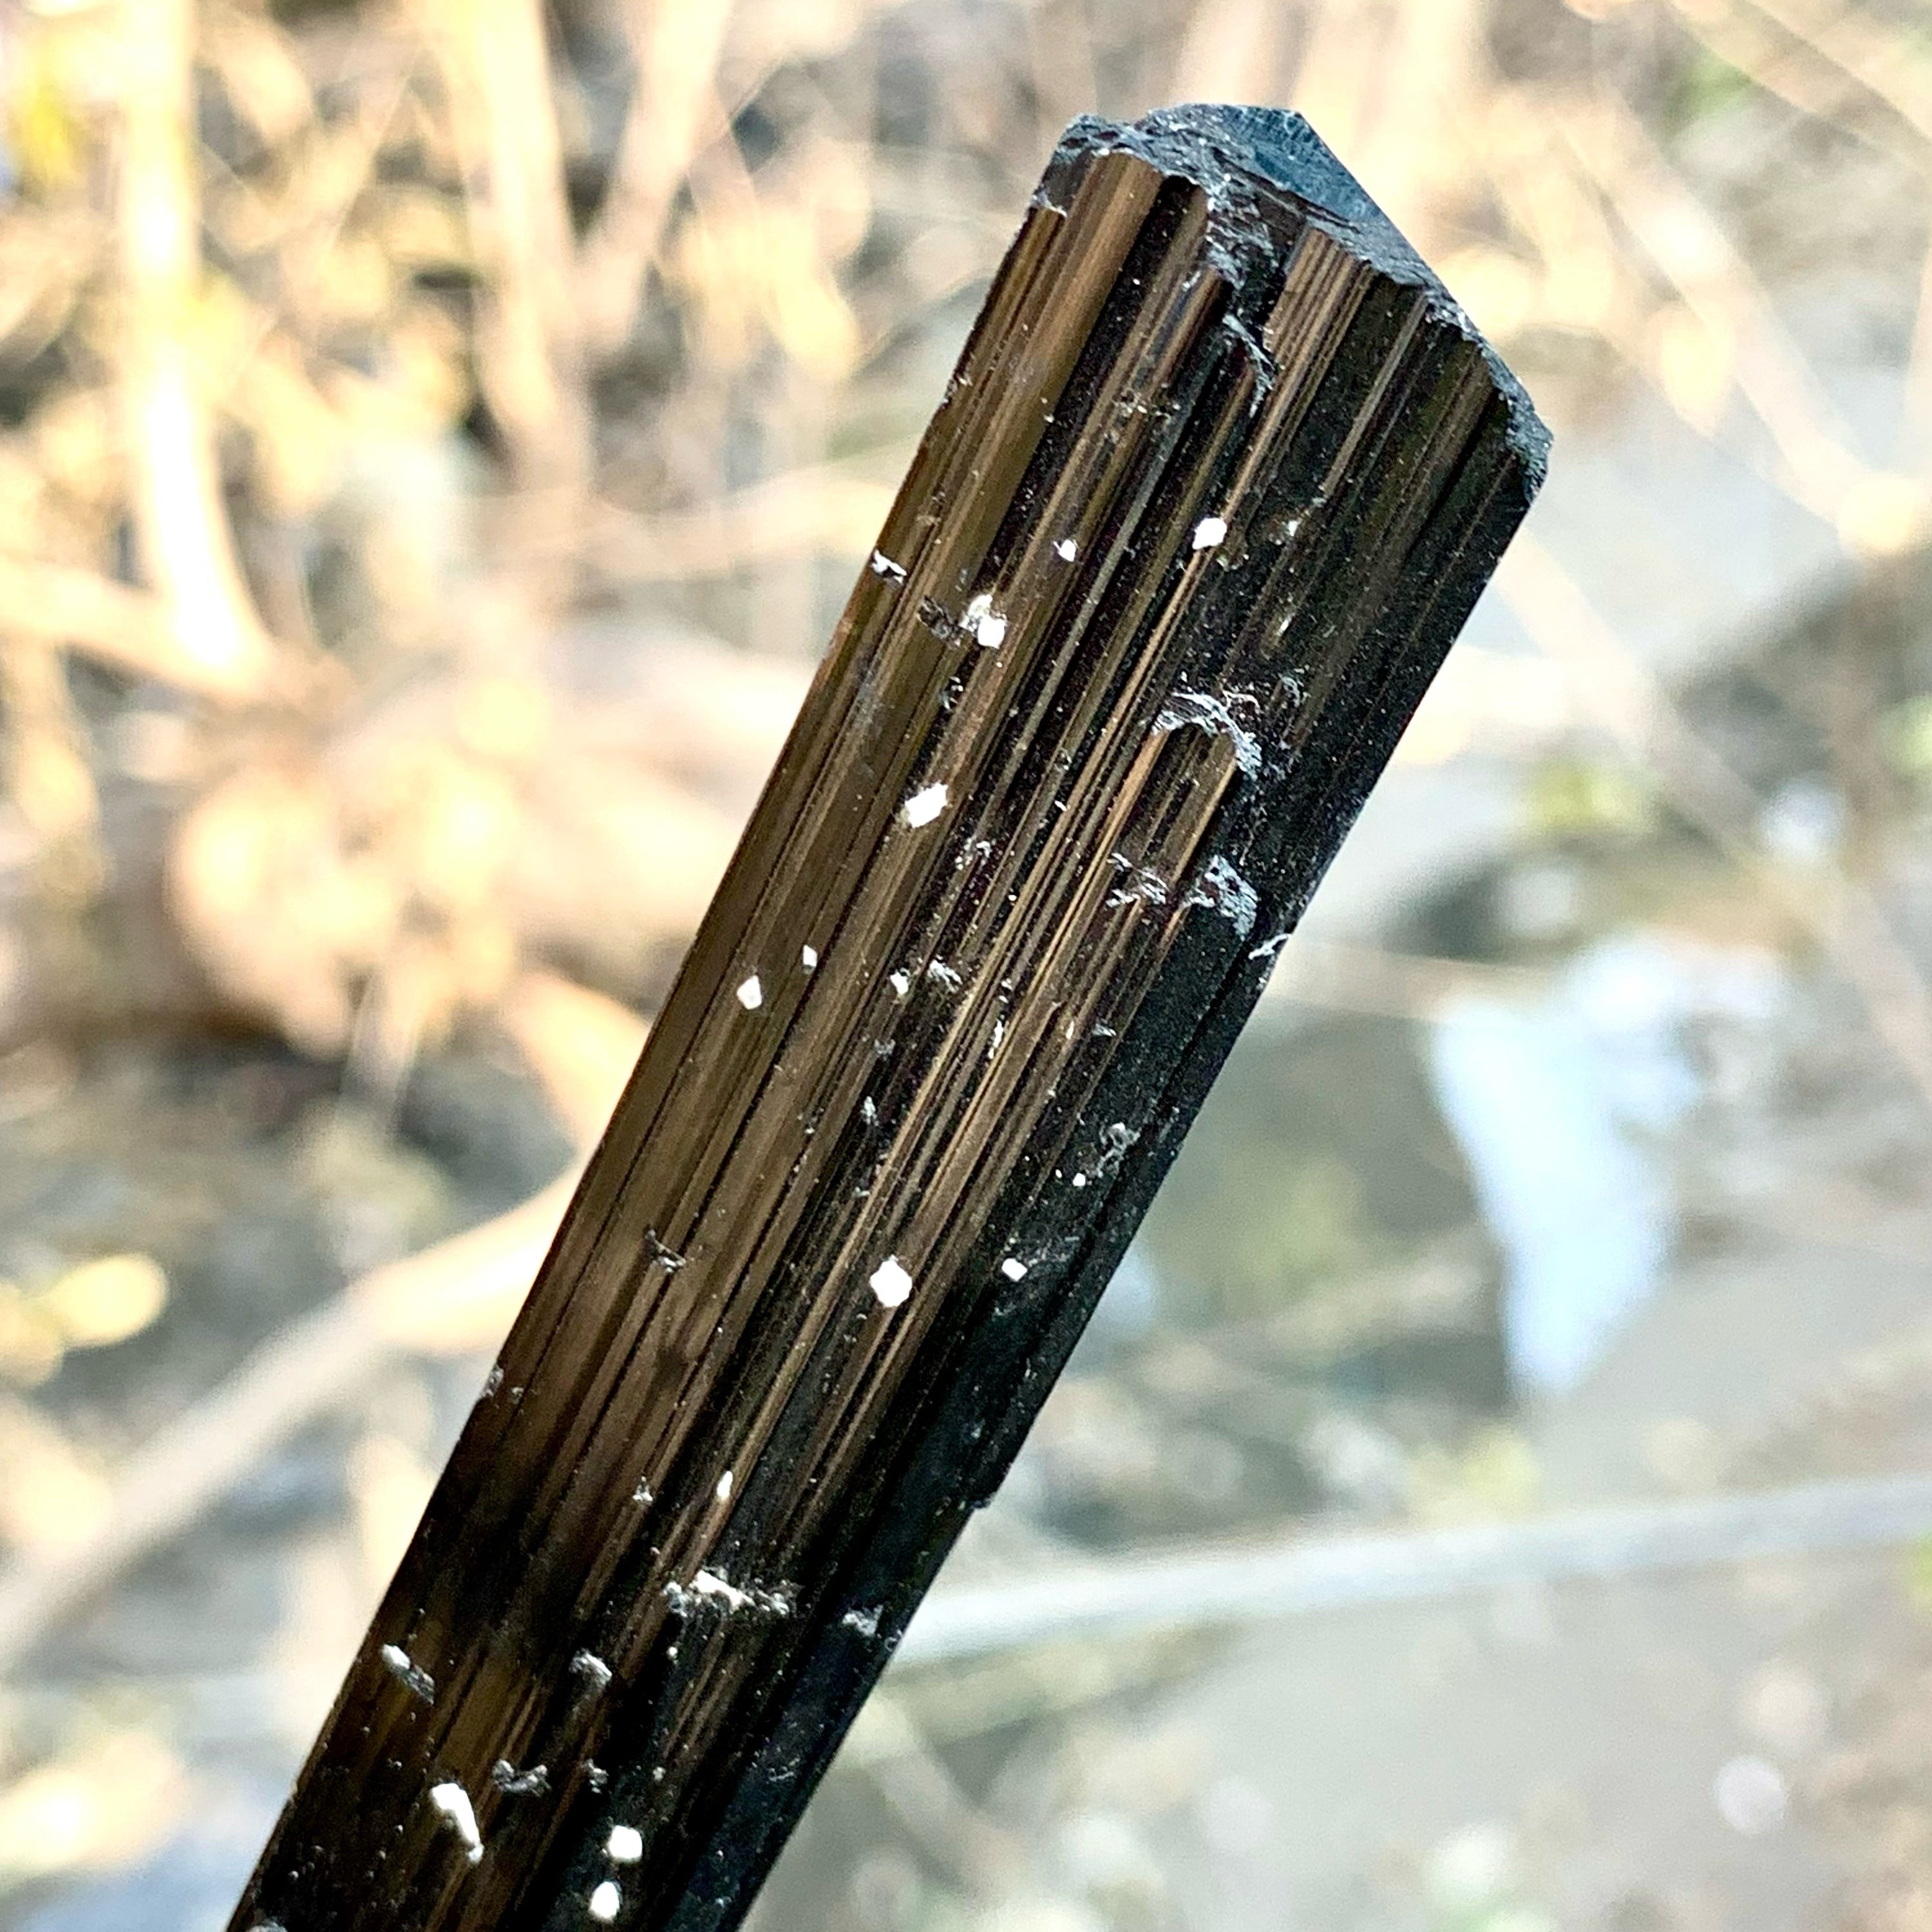 Attractive Elongated Black Tourmaline Crystal On Snowy White Albite